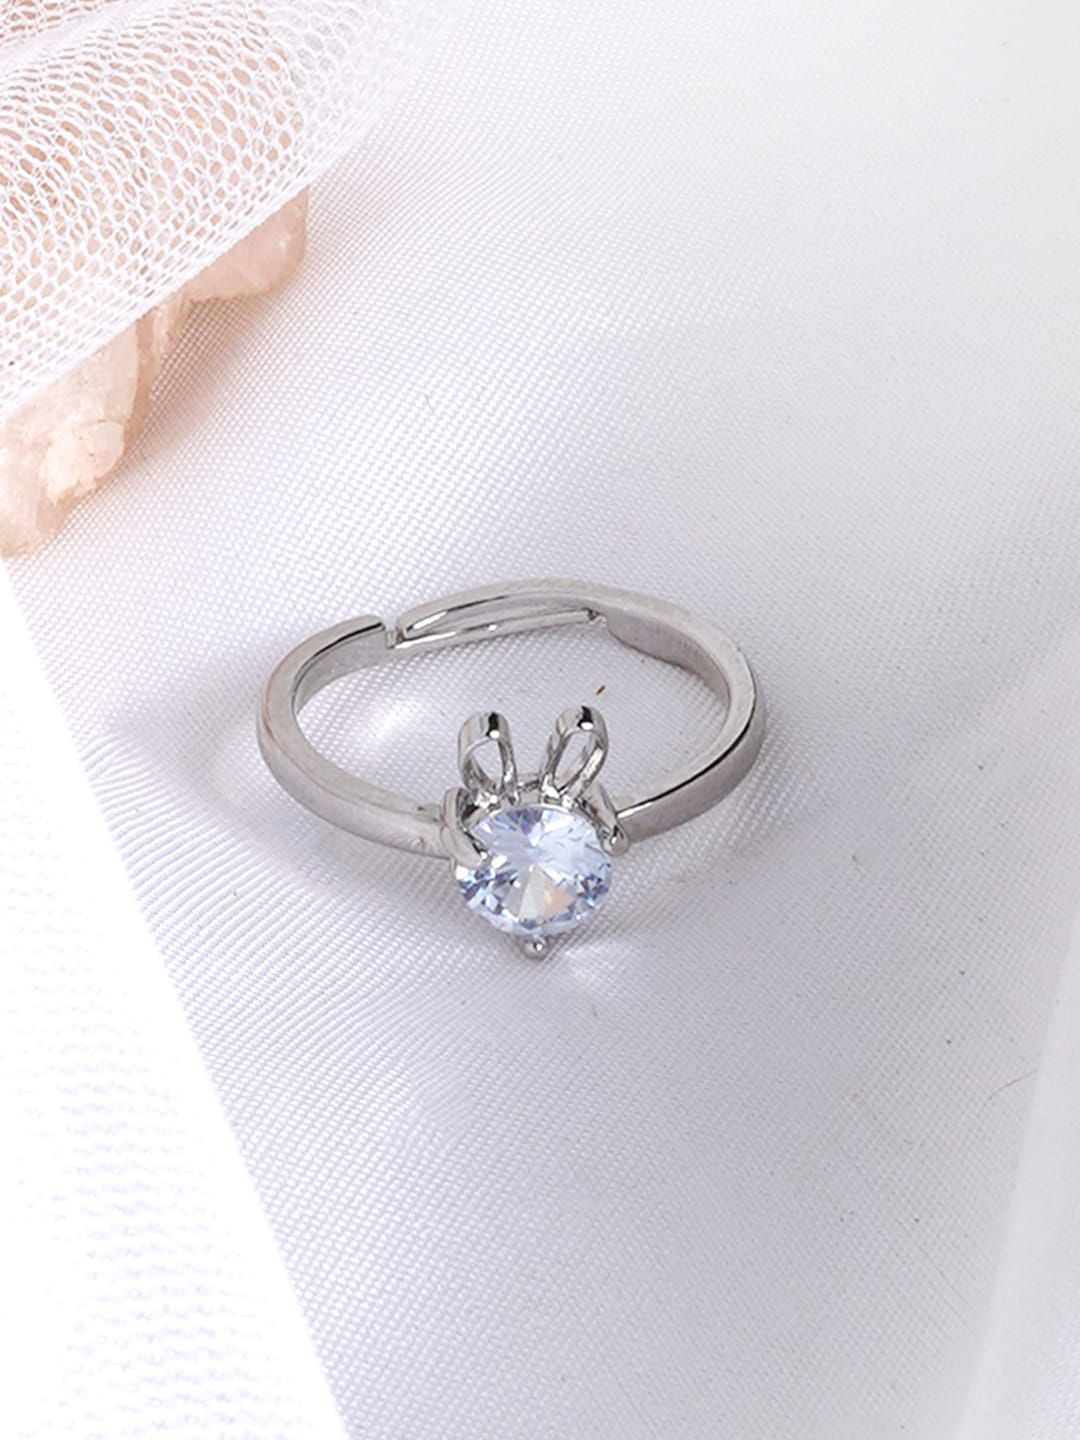 JOKER & WITCH Silver-Plated Stone-Studded Adjustable Bunny Hop Finger Ring Price in India